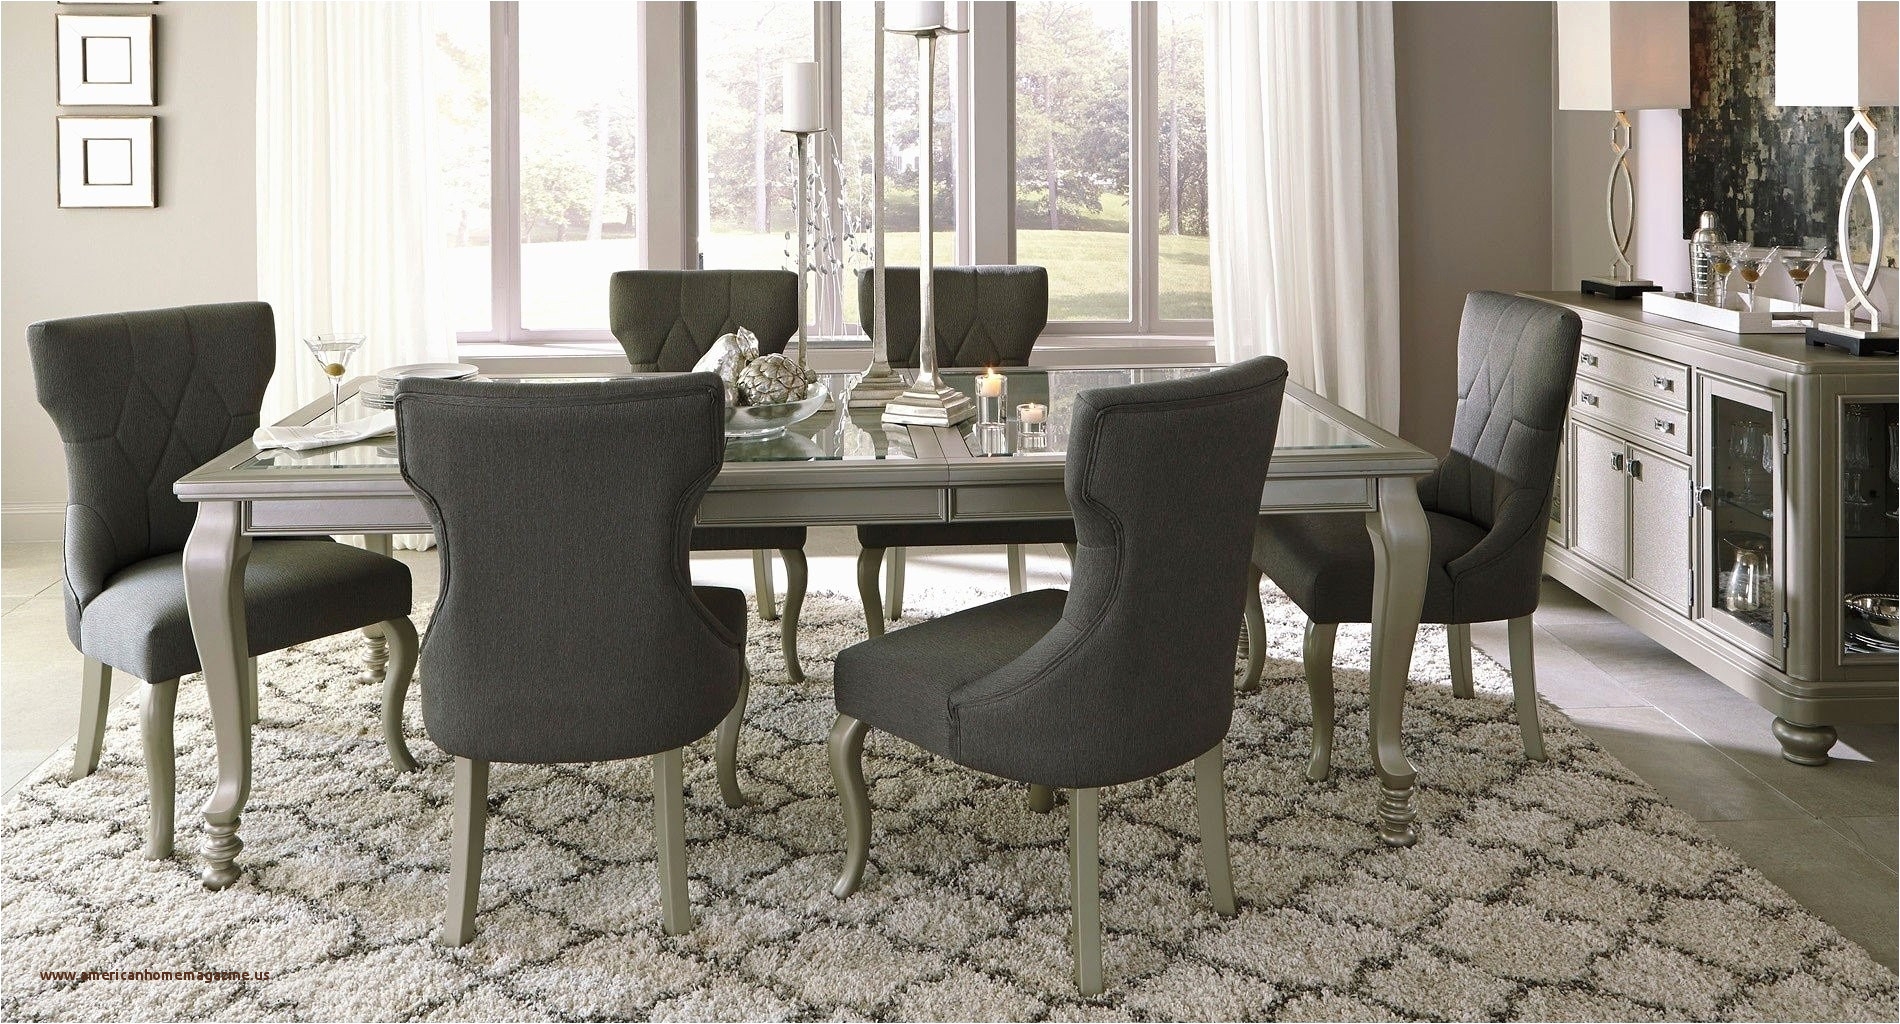 dining room sets dfw country dining room sets best of dining room furniture dallas of dining